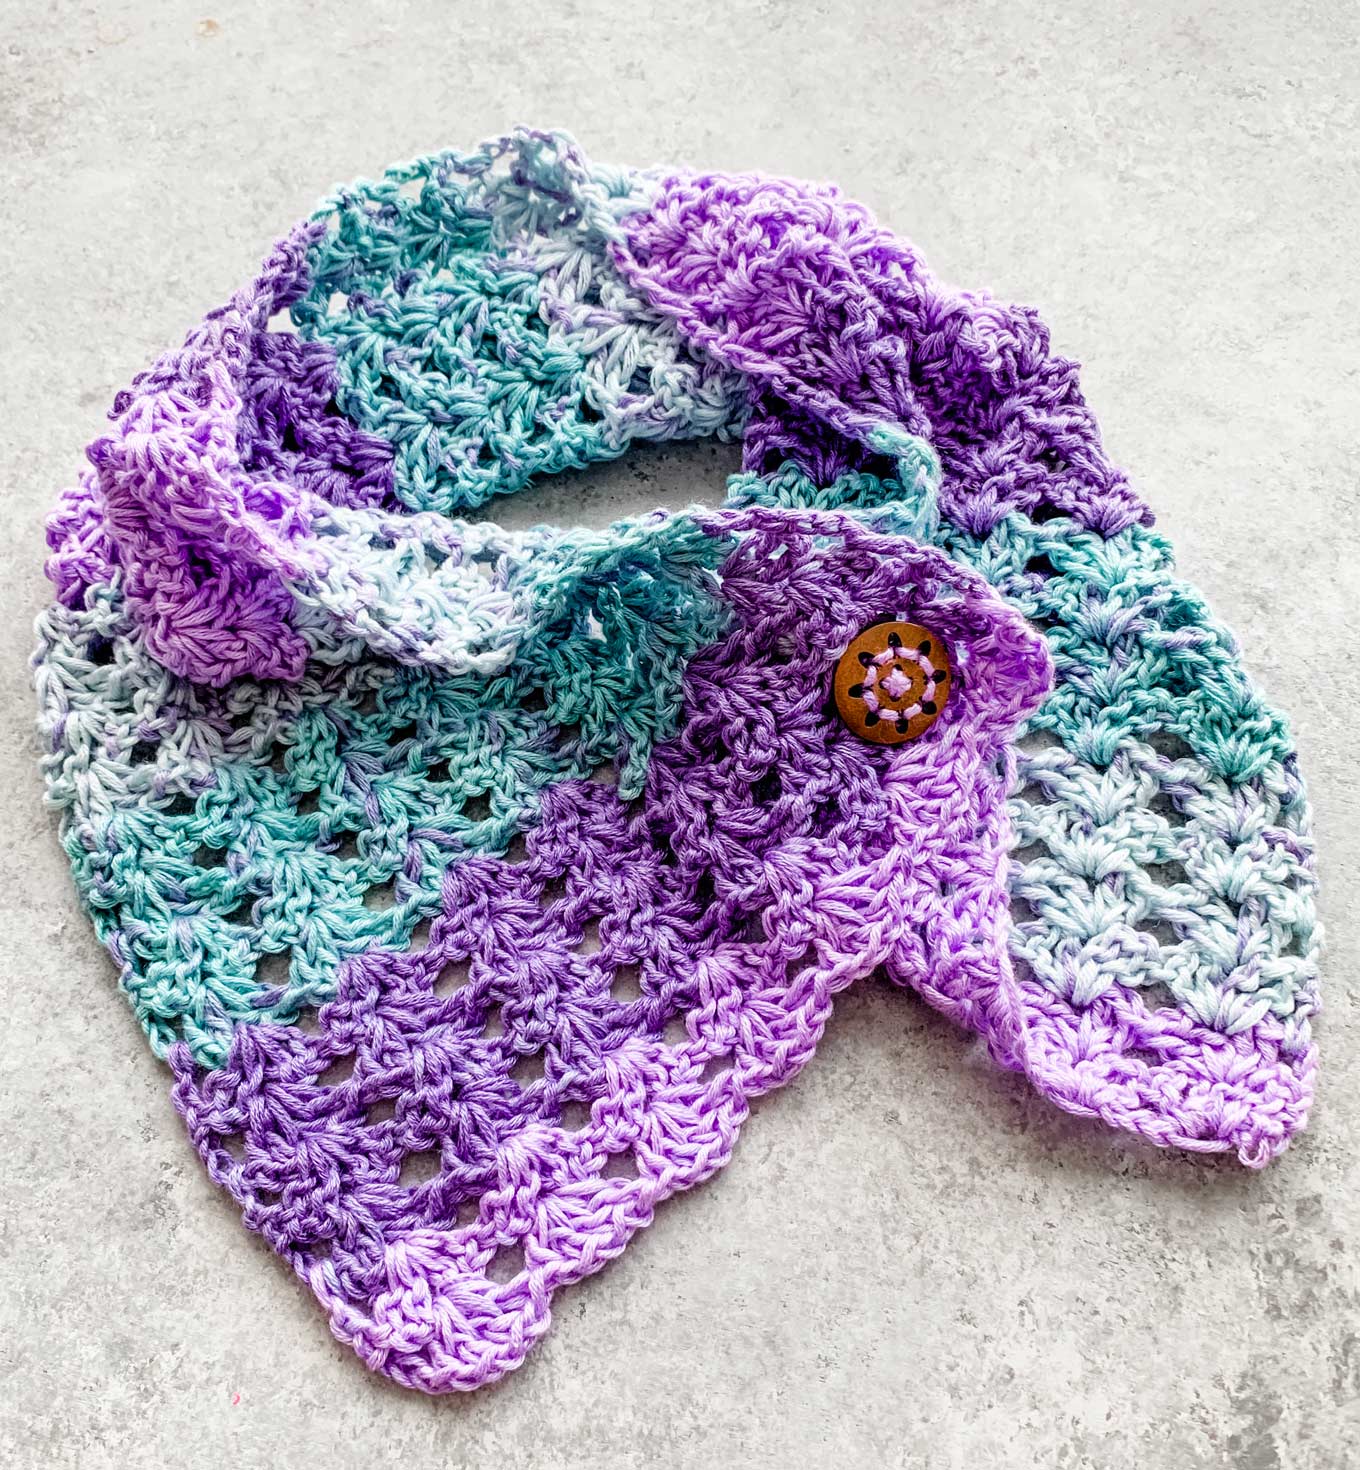 Lightweight lacy cowl perfect for Spring